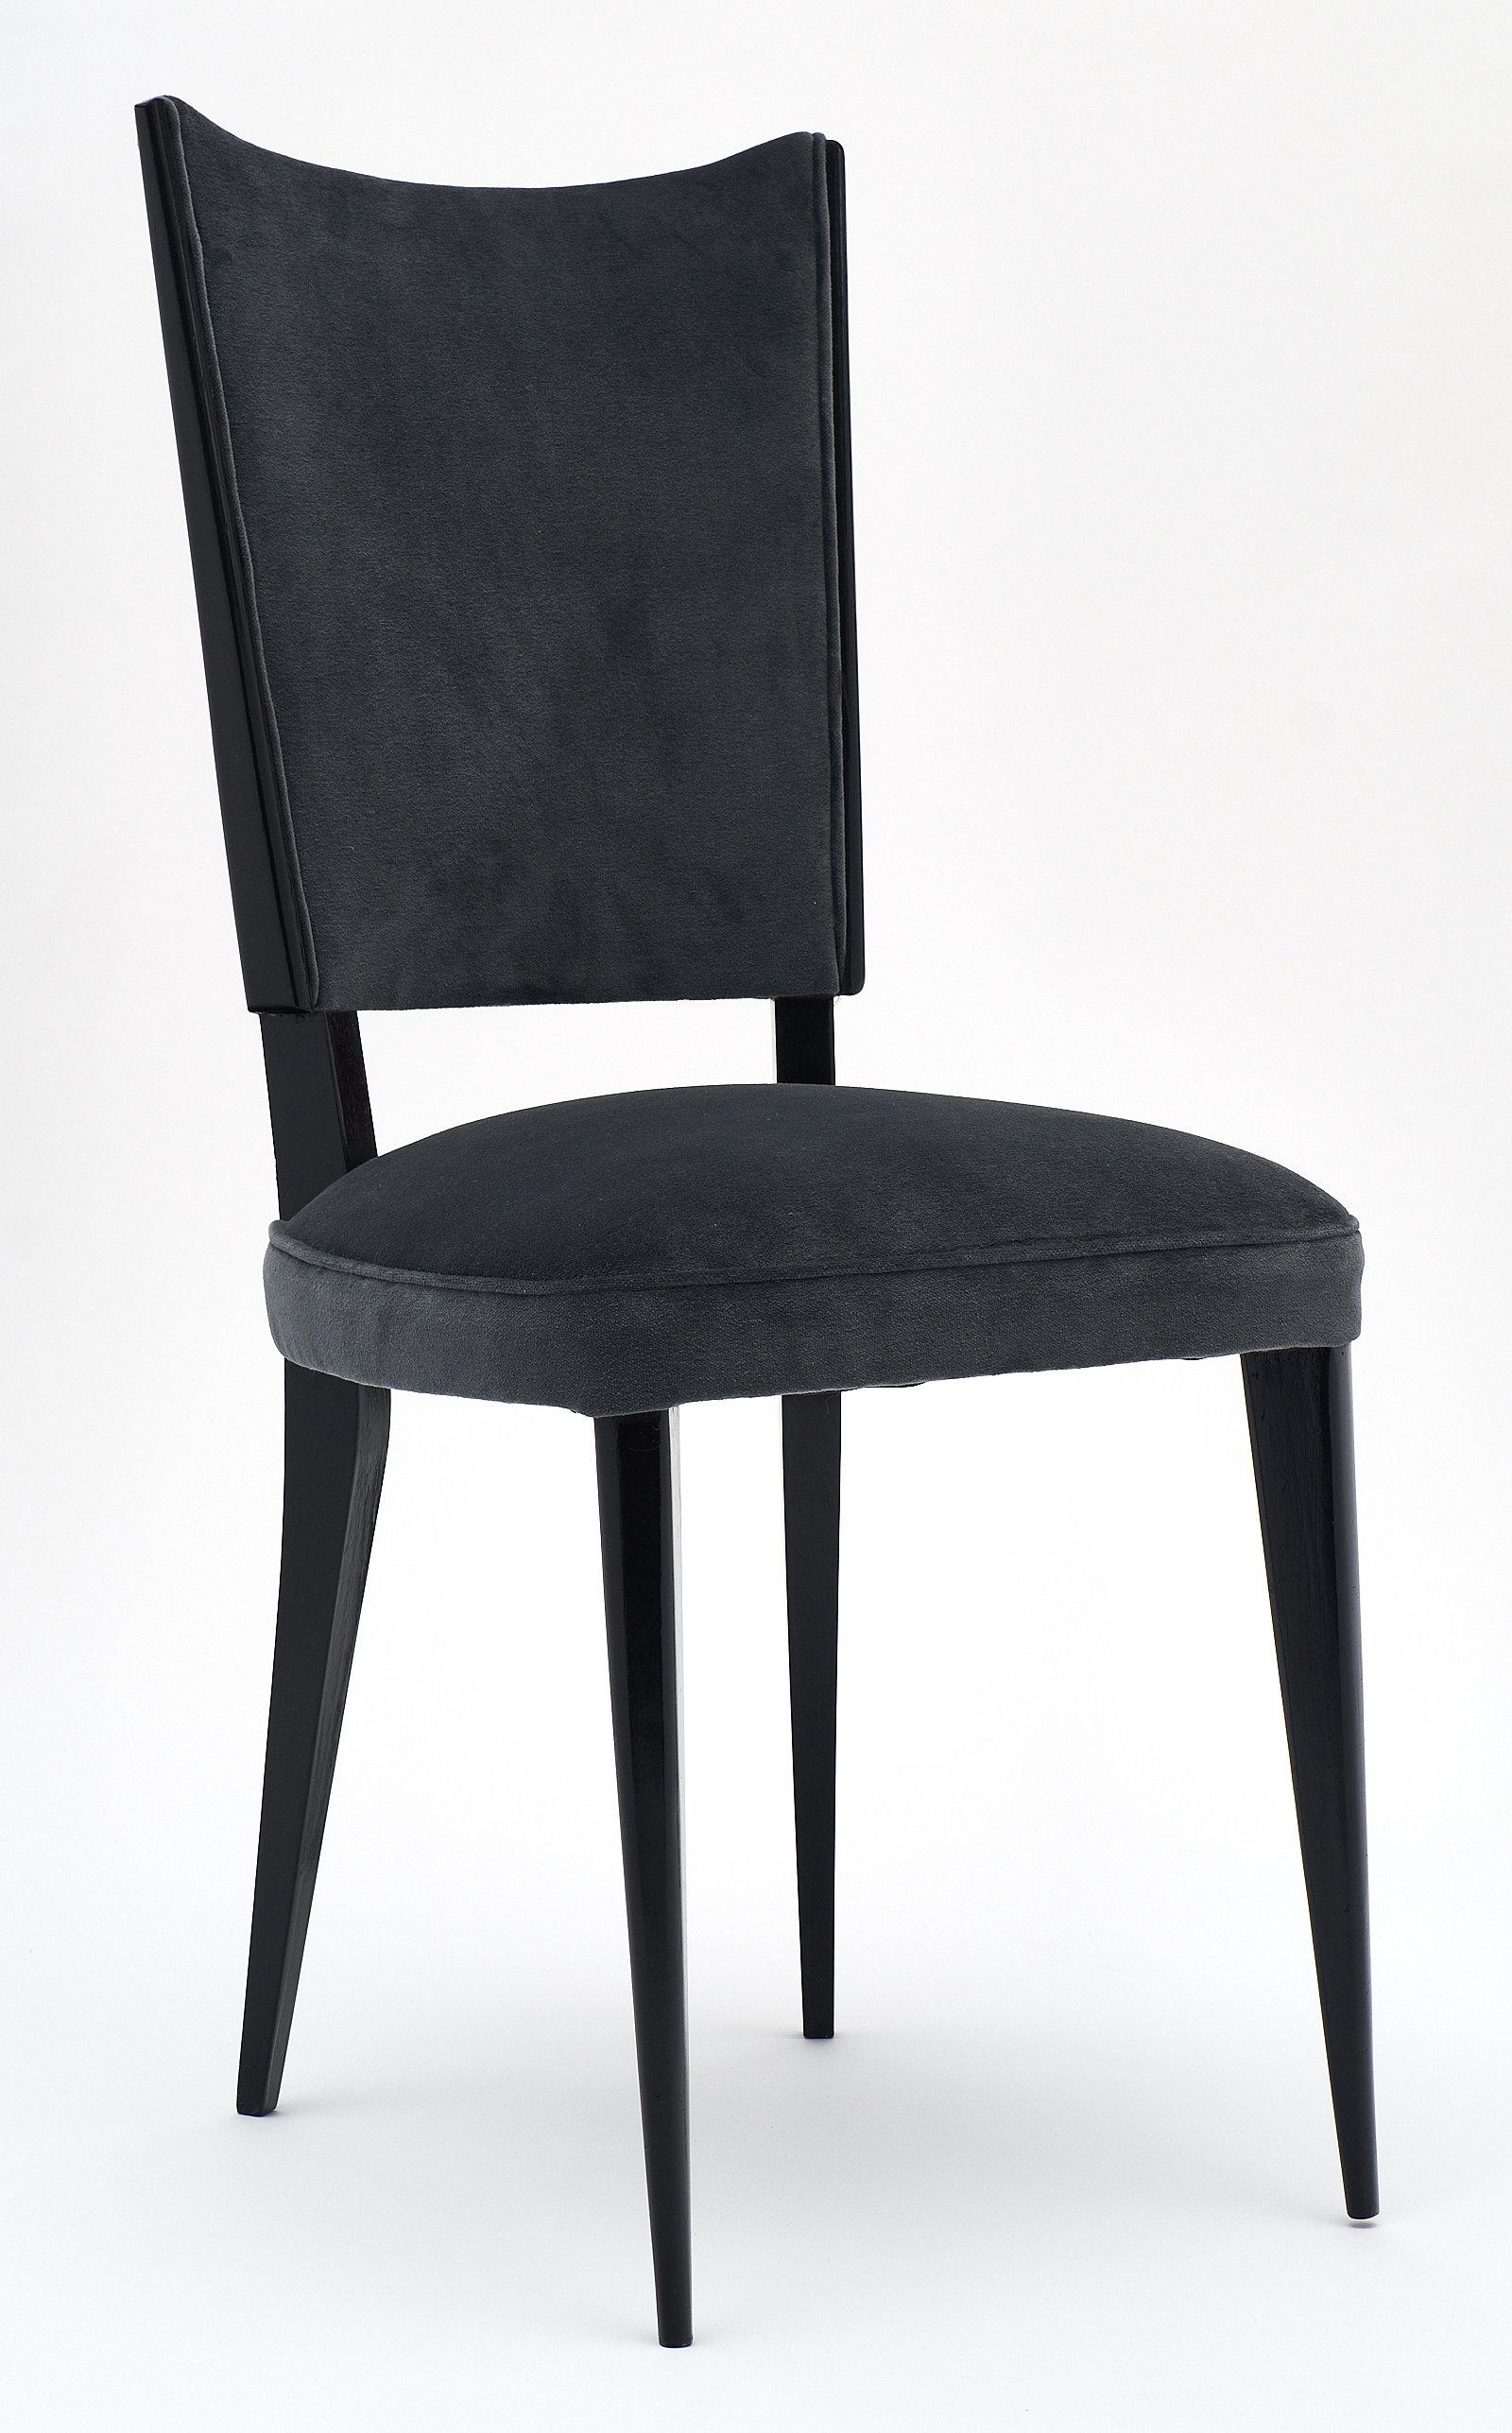 A set of French midcentury dark gray velvet dining chairs with ebonized beech wood frames finished in a lustrous French polish. We loved the comfort and the perfect lines of these strong chairs. They have been newly upholstered.